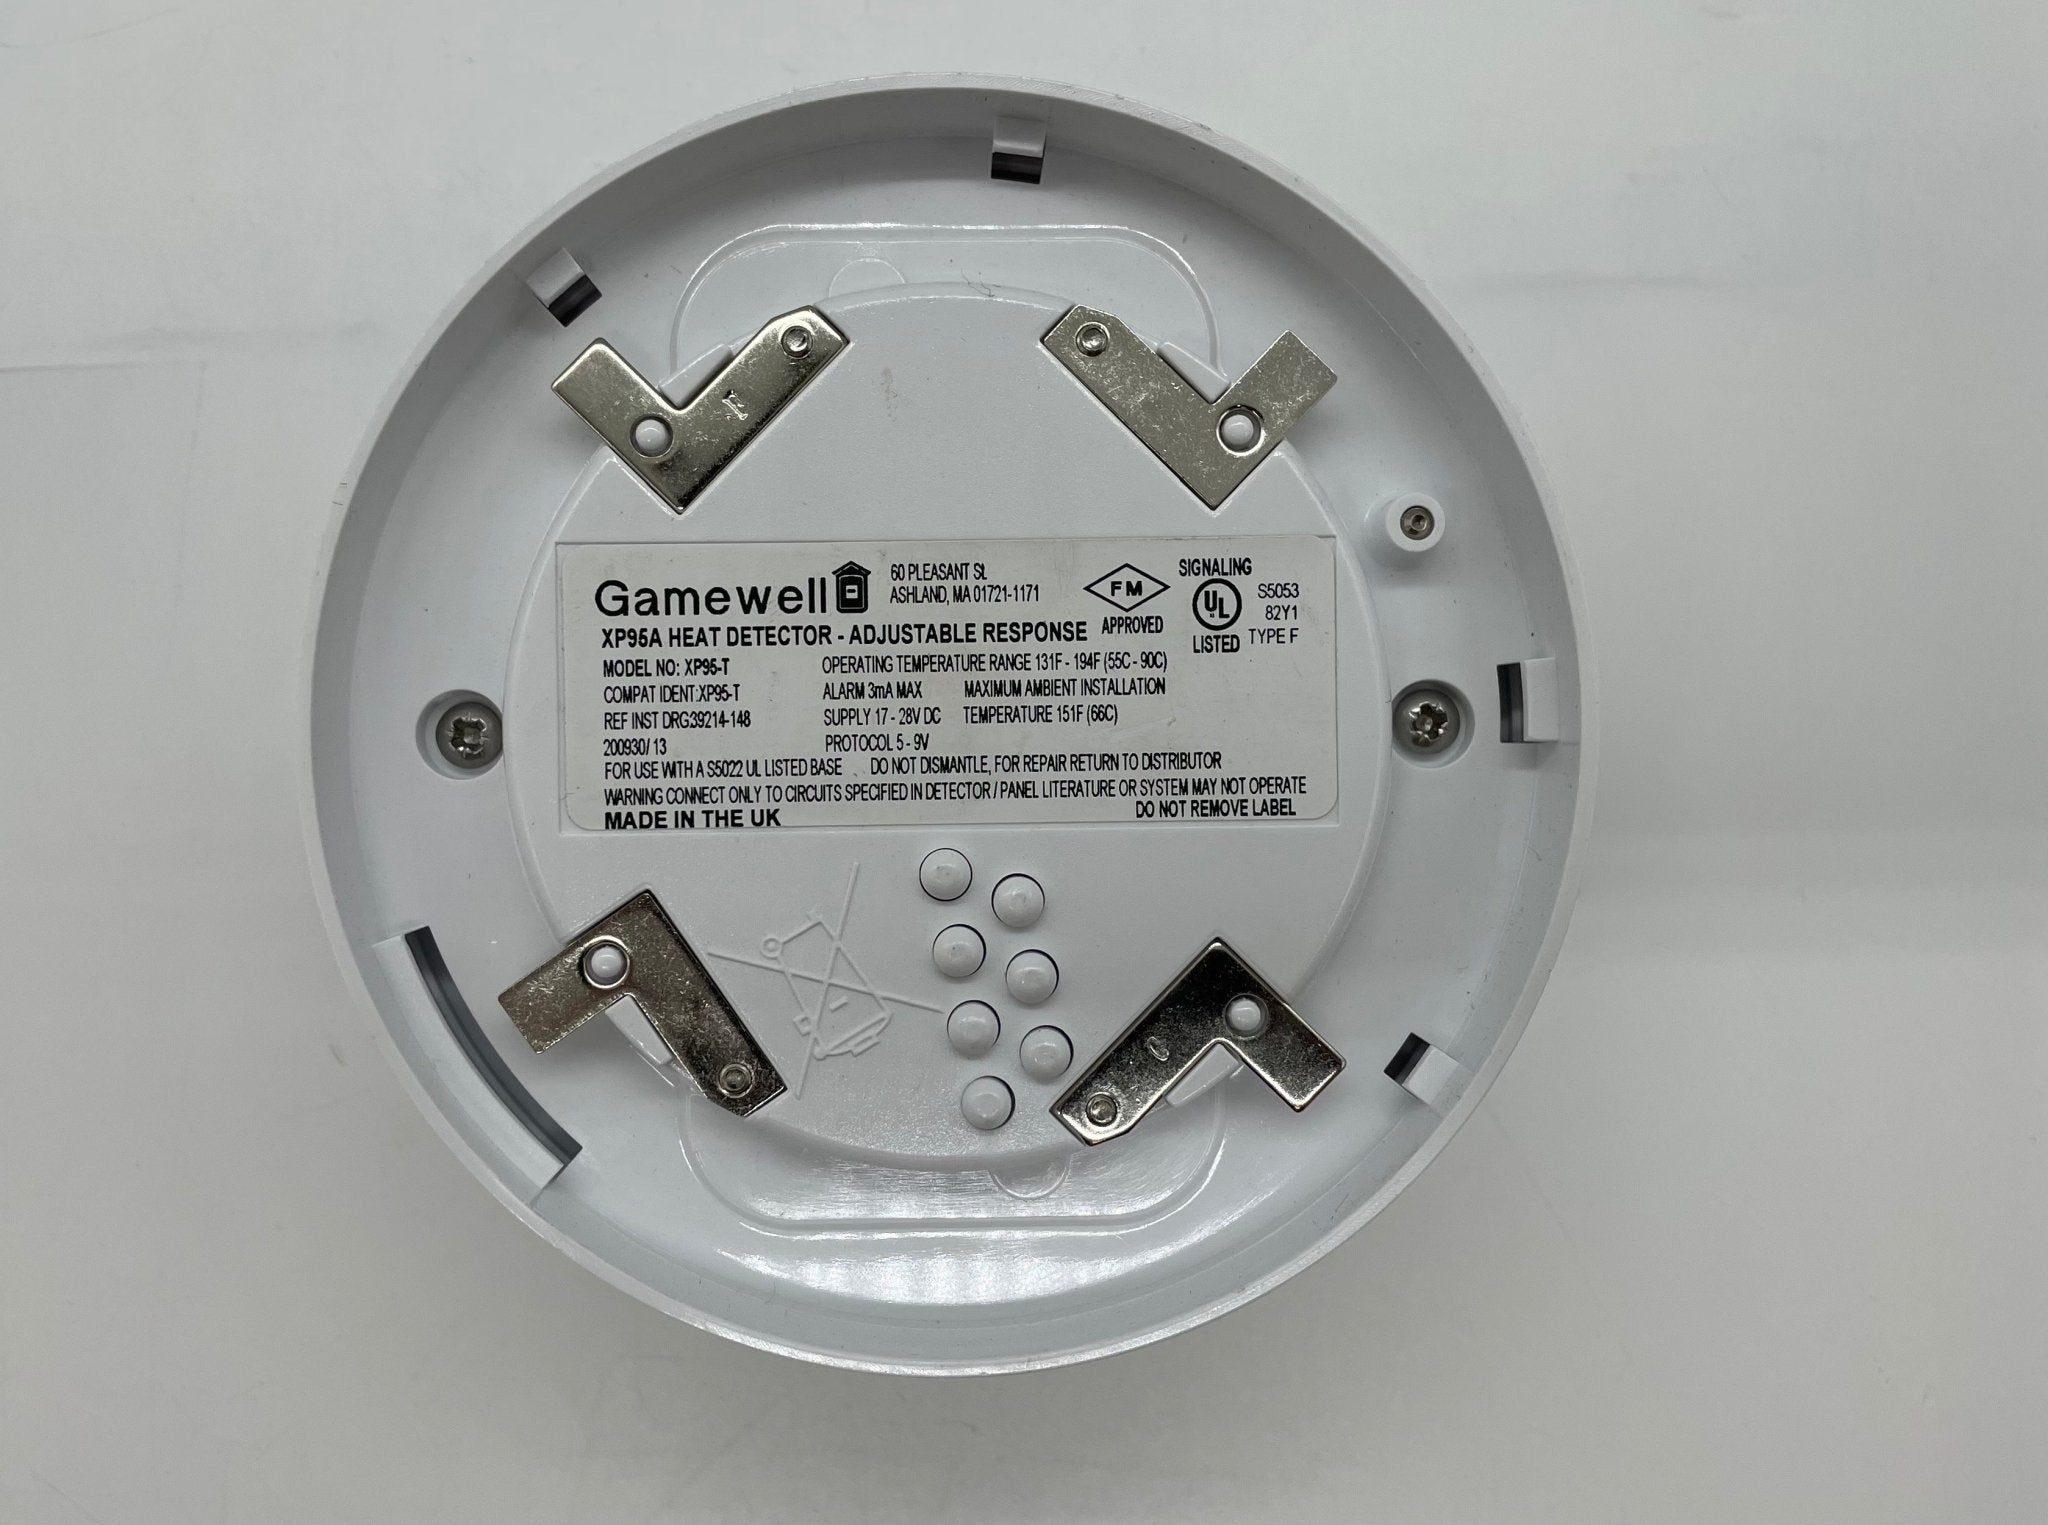 Gamewell-FCI XP95-T - The Fire Alarm Supplier